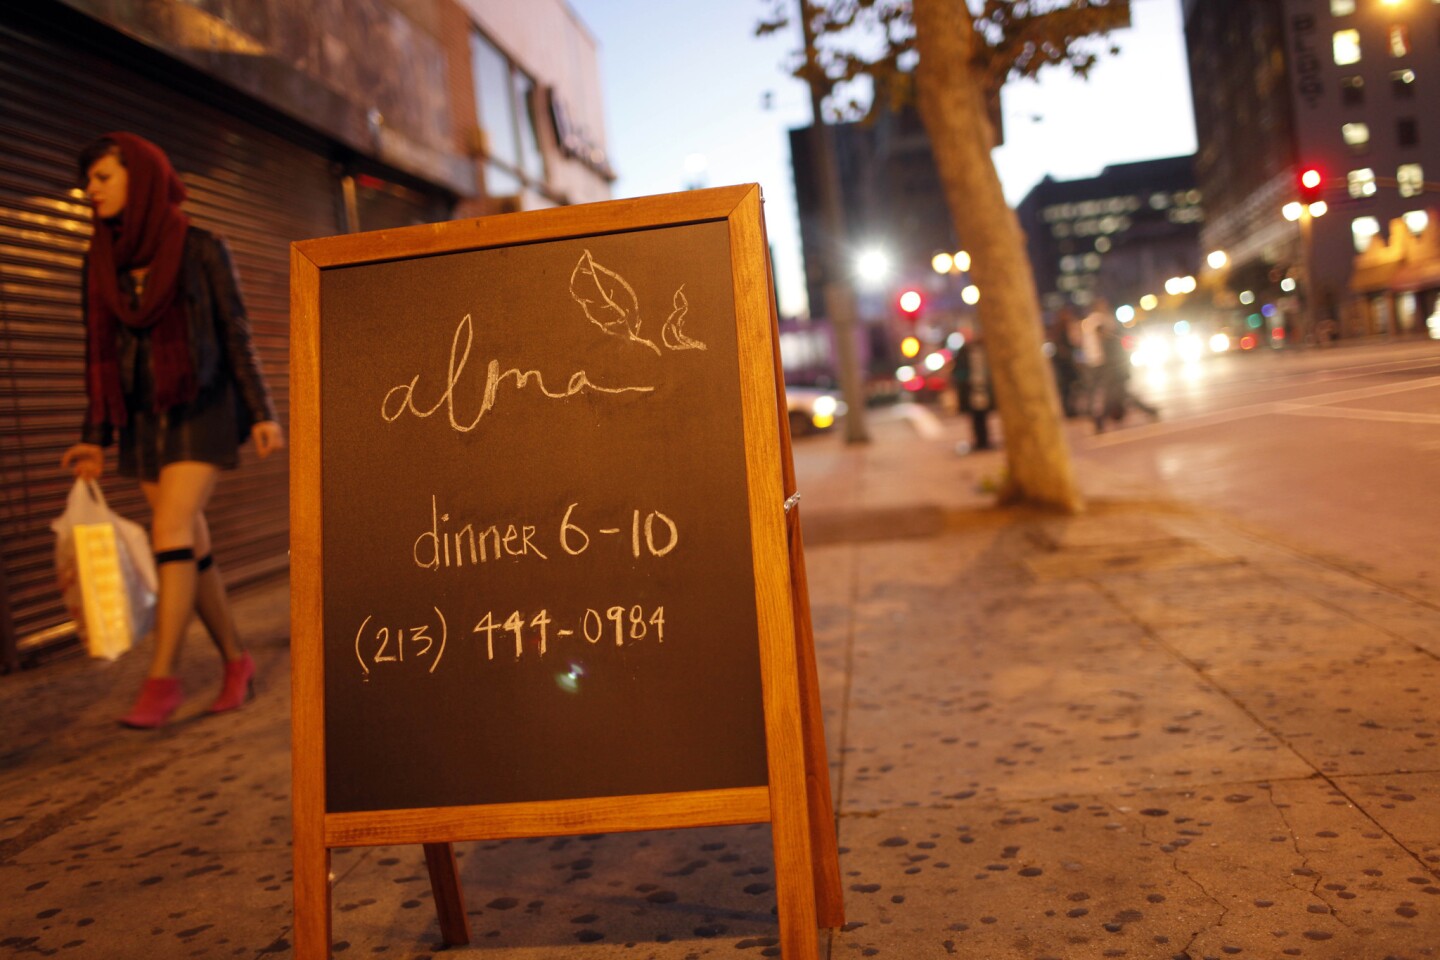 Located downtown on Broadway, Alma is unassuming from the outside, to say the least